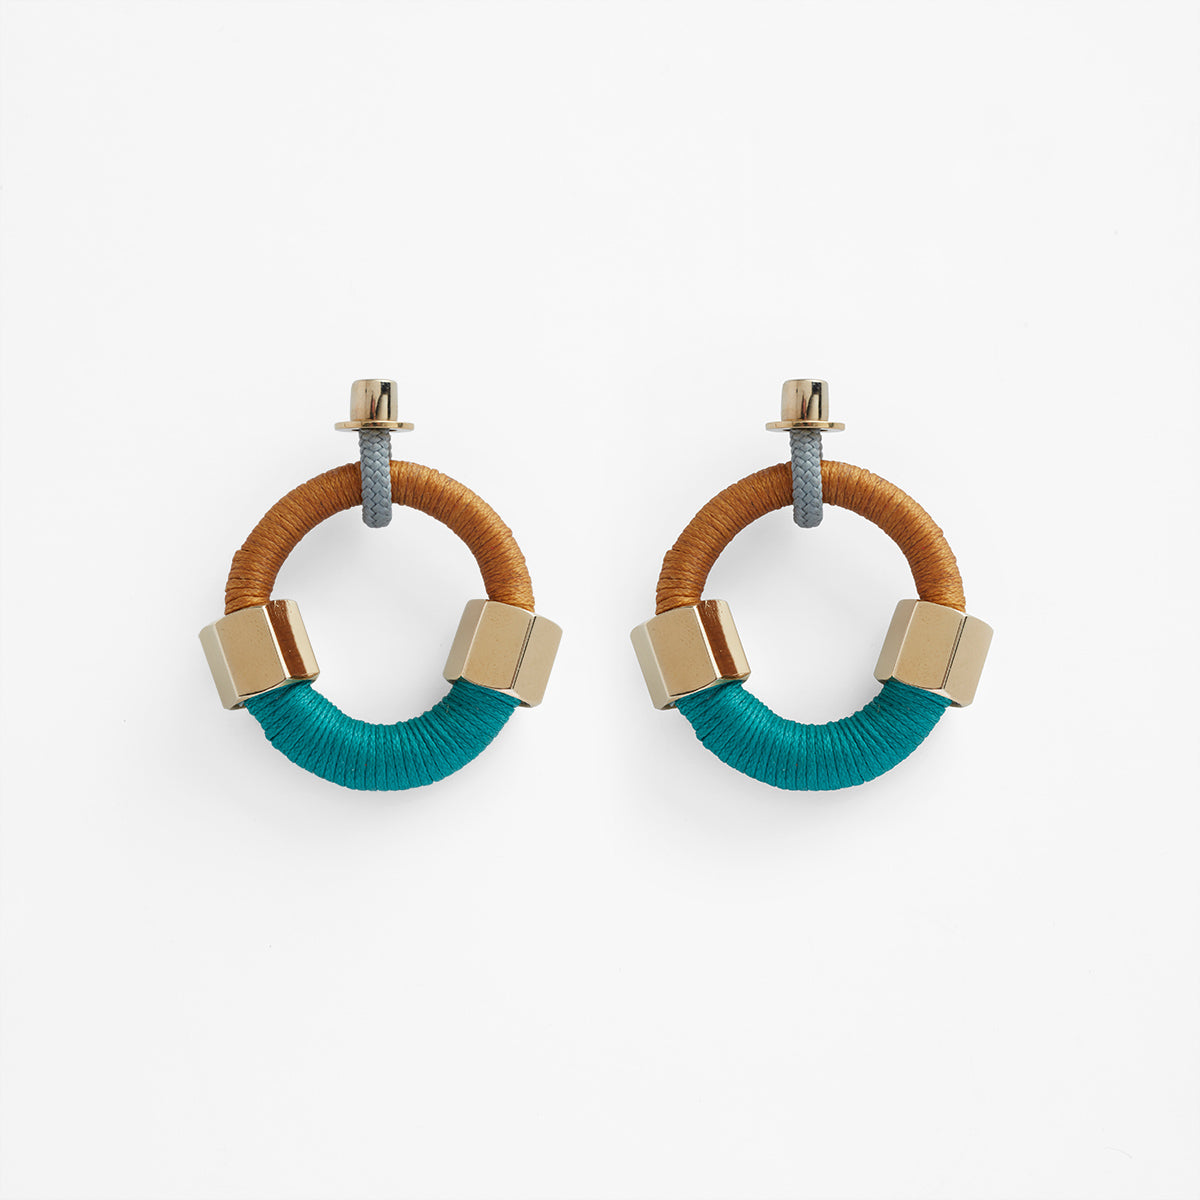 PICHULIK Handcrafted, Unique, Symbolic Jewellery: Lucchi earrings ...